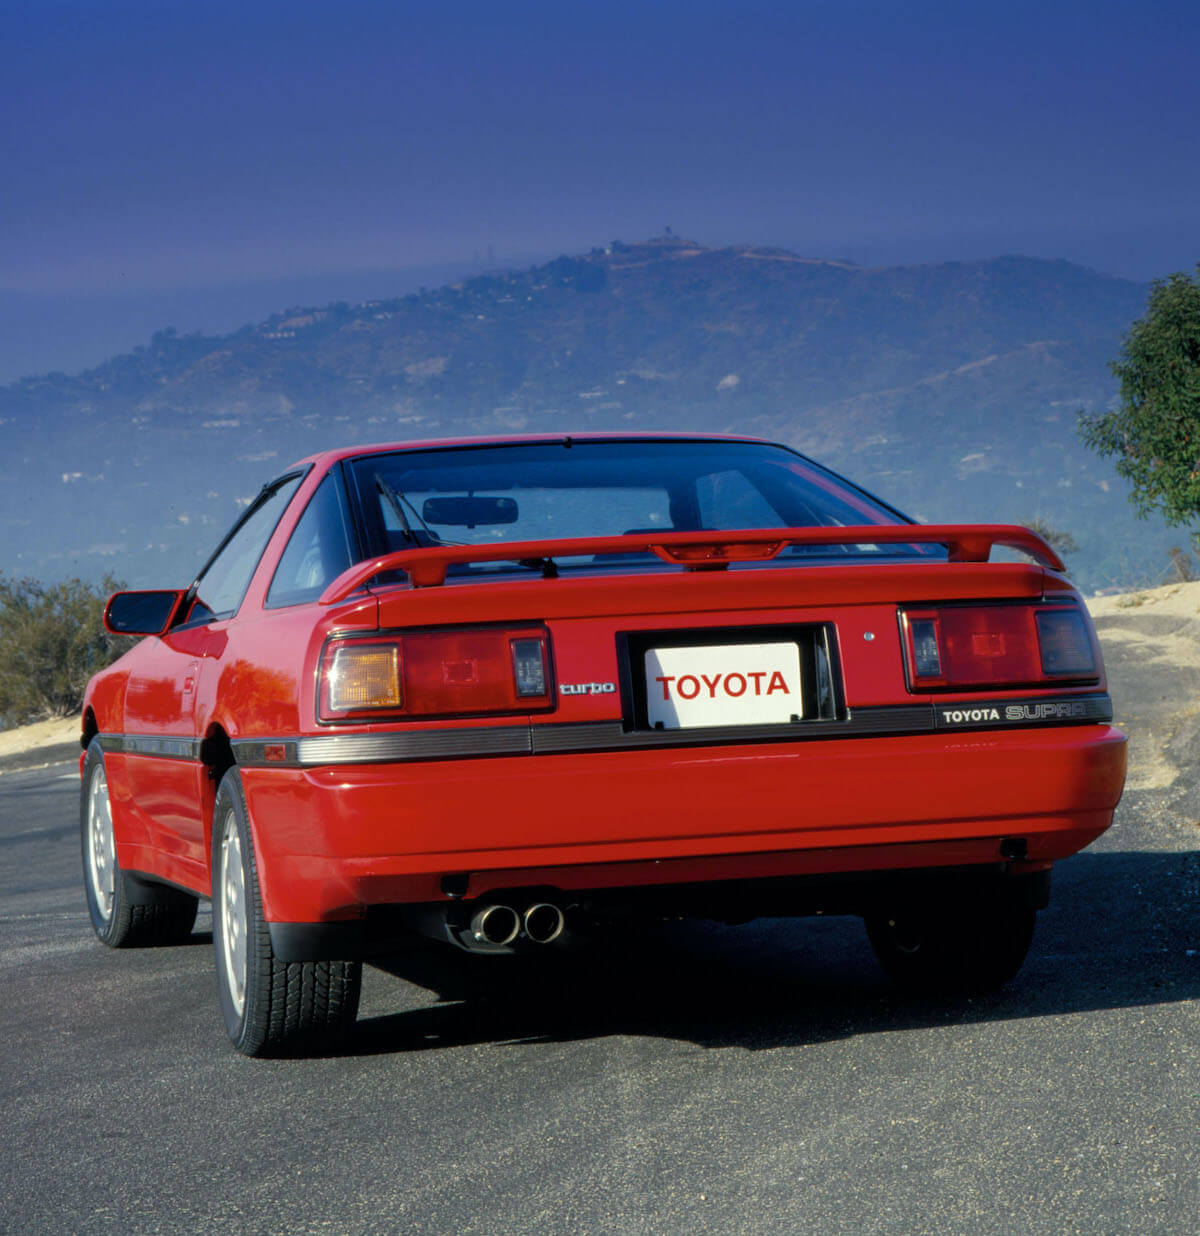 A rear view of a red 1987 Toyota Supra